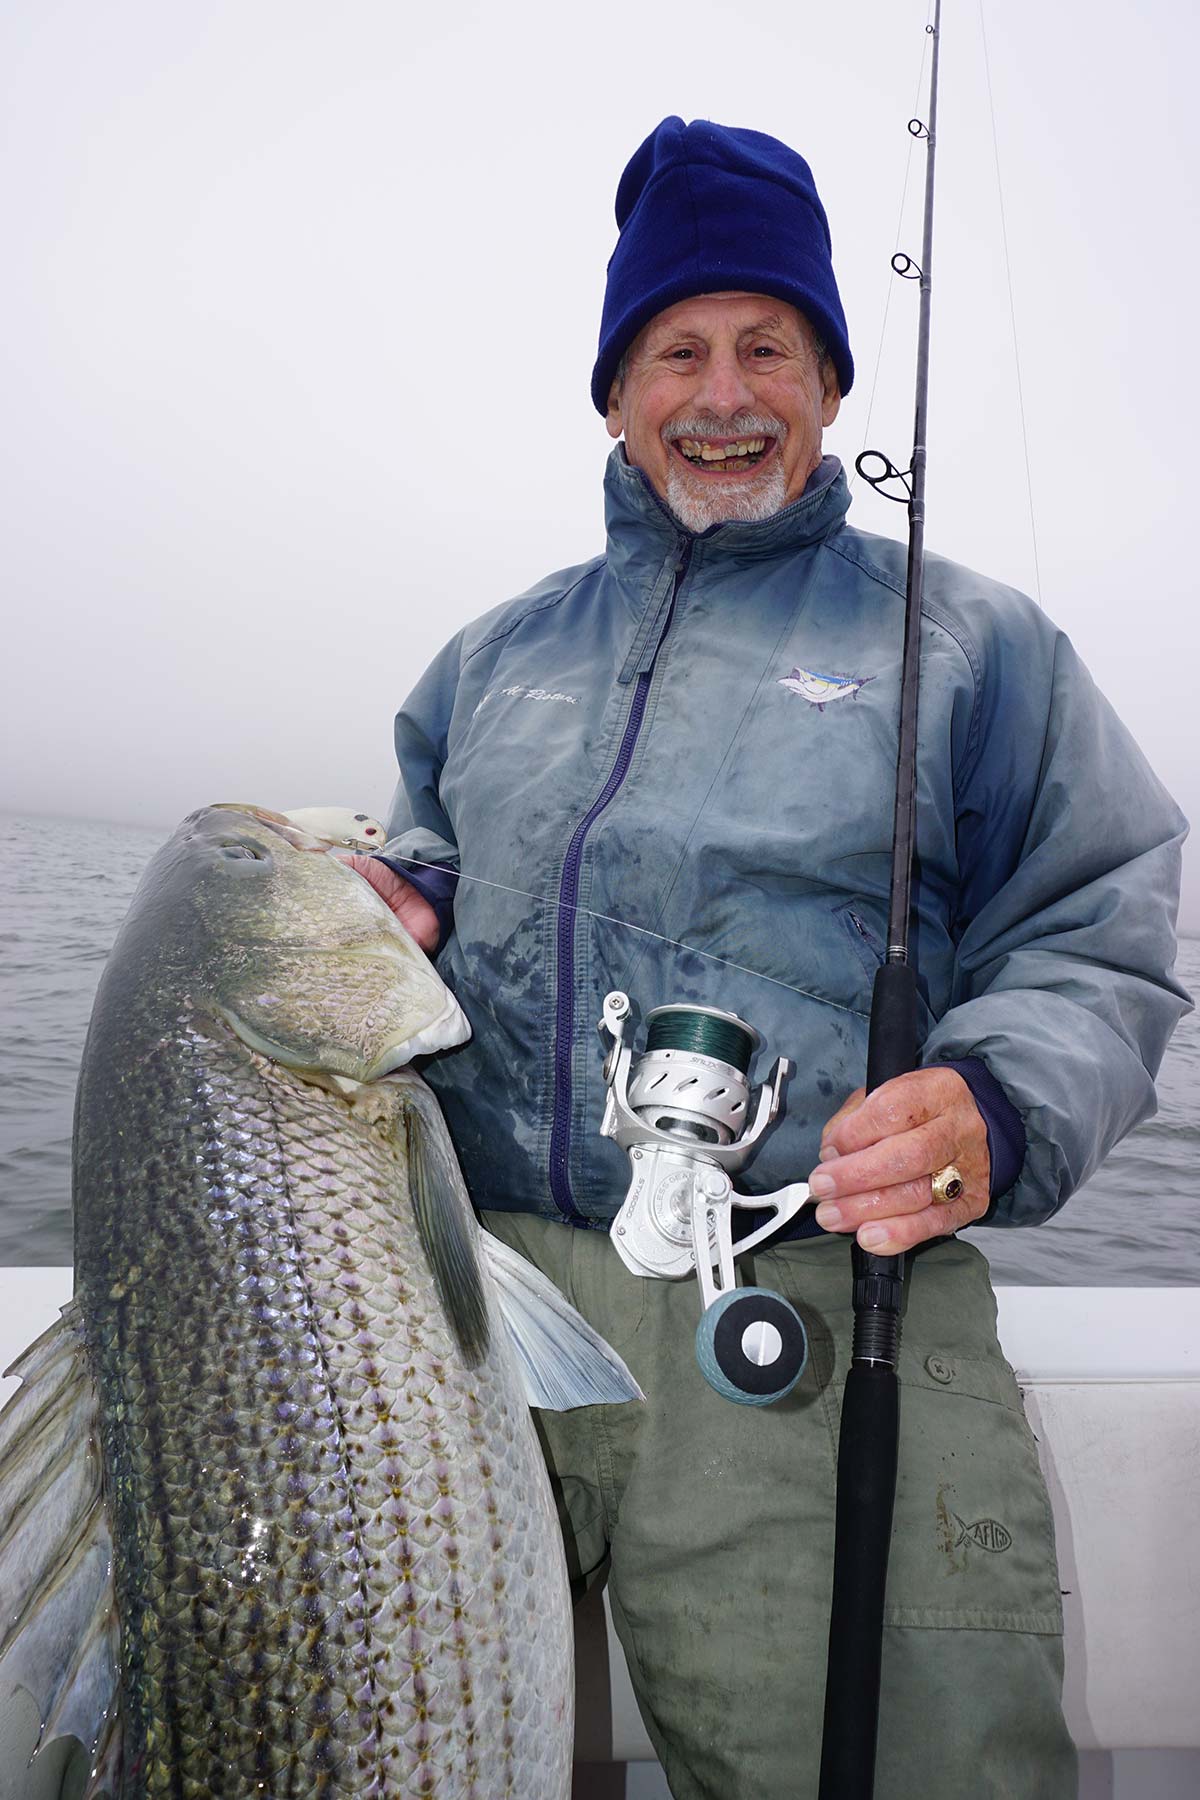 Go Big, Go Often: Catching A Personal Best - The Fisherman